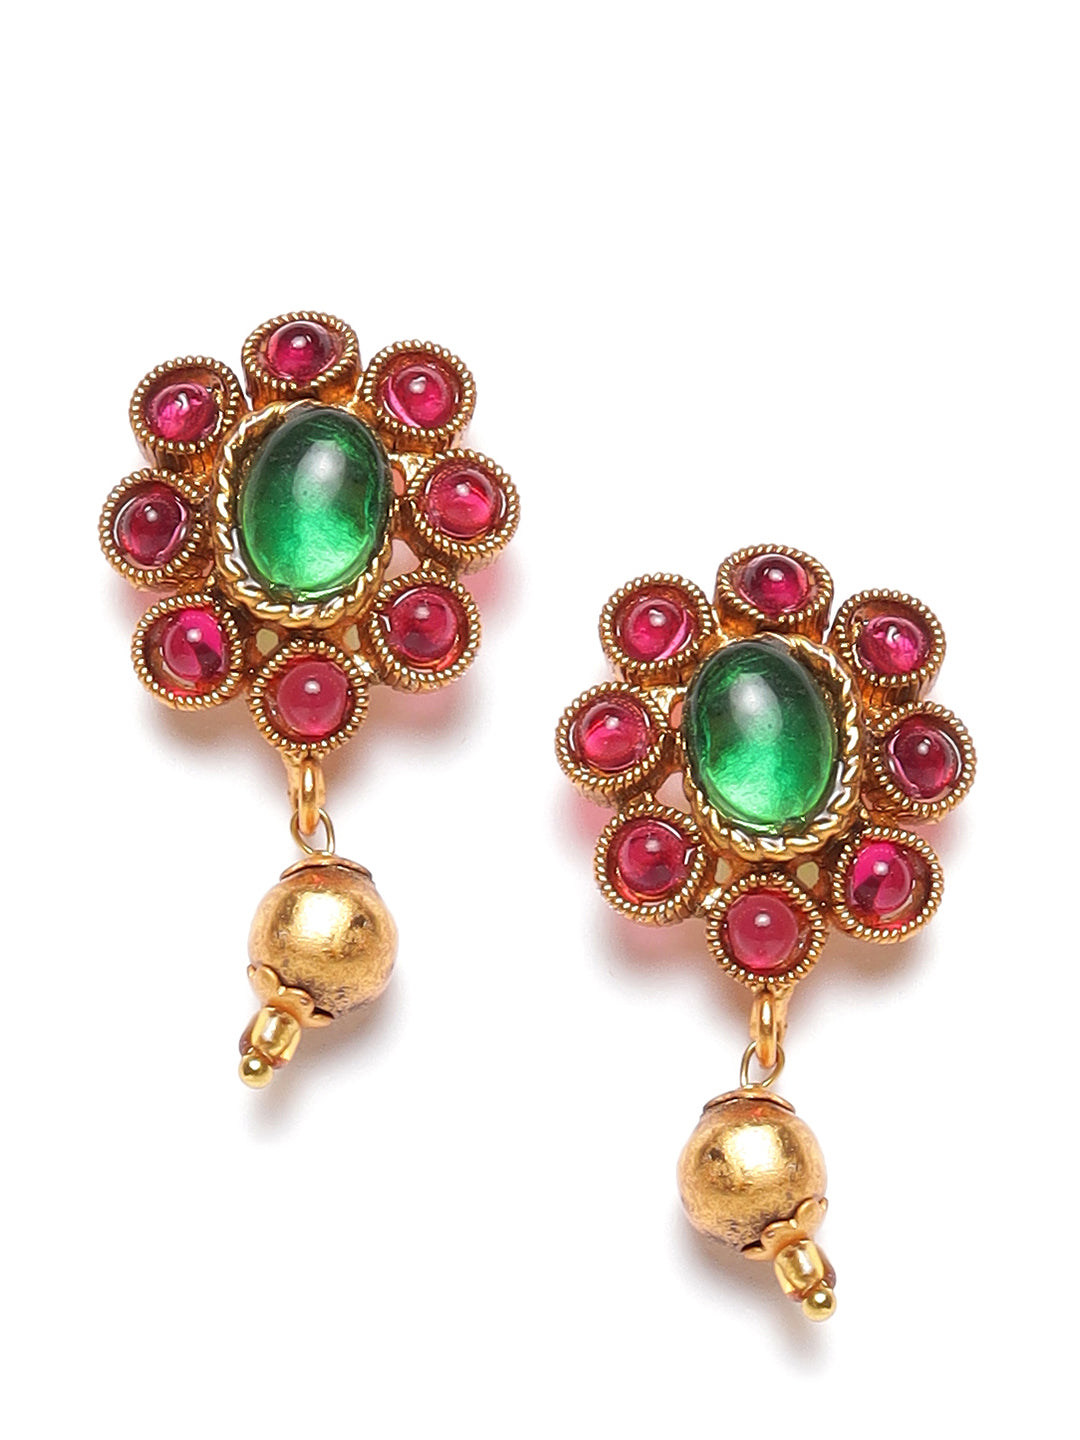 Gold-Plated Pink & Green Stone-Studded & Beaded Handcrafted Jewellery Set